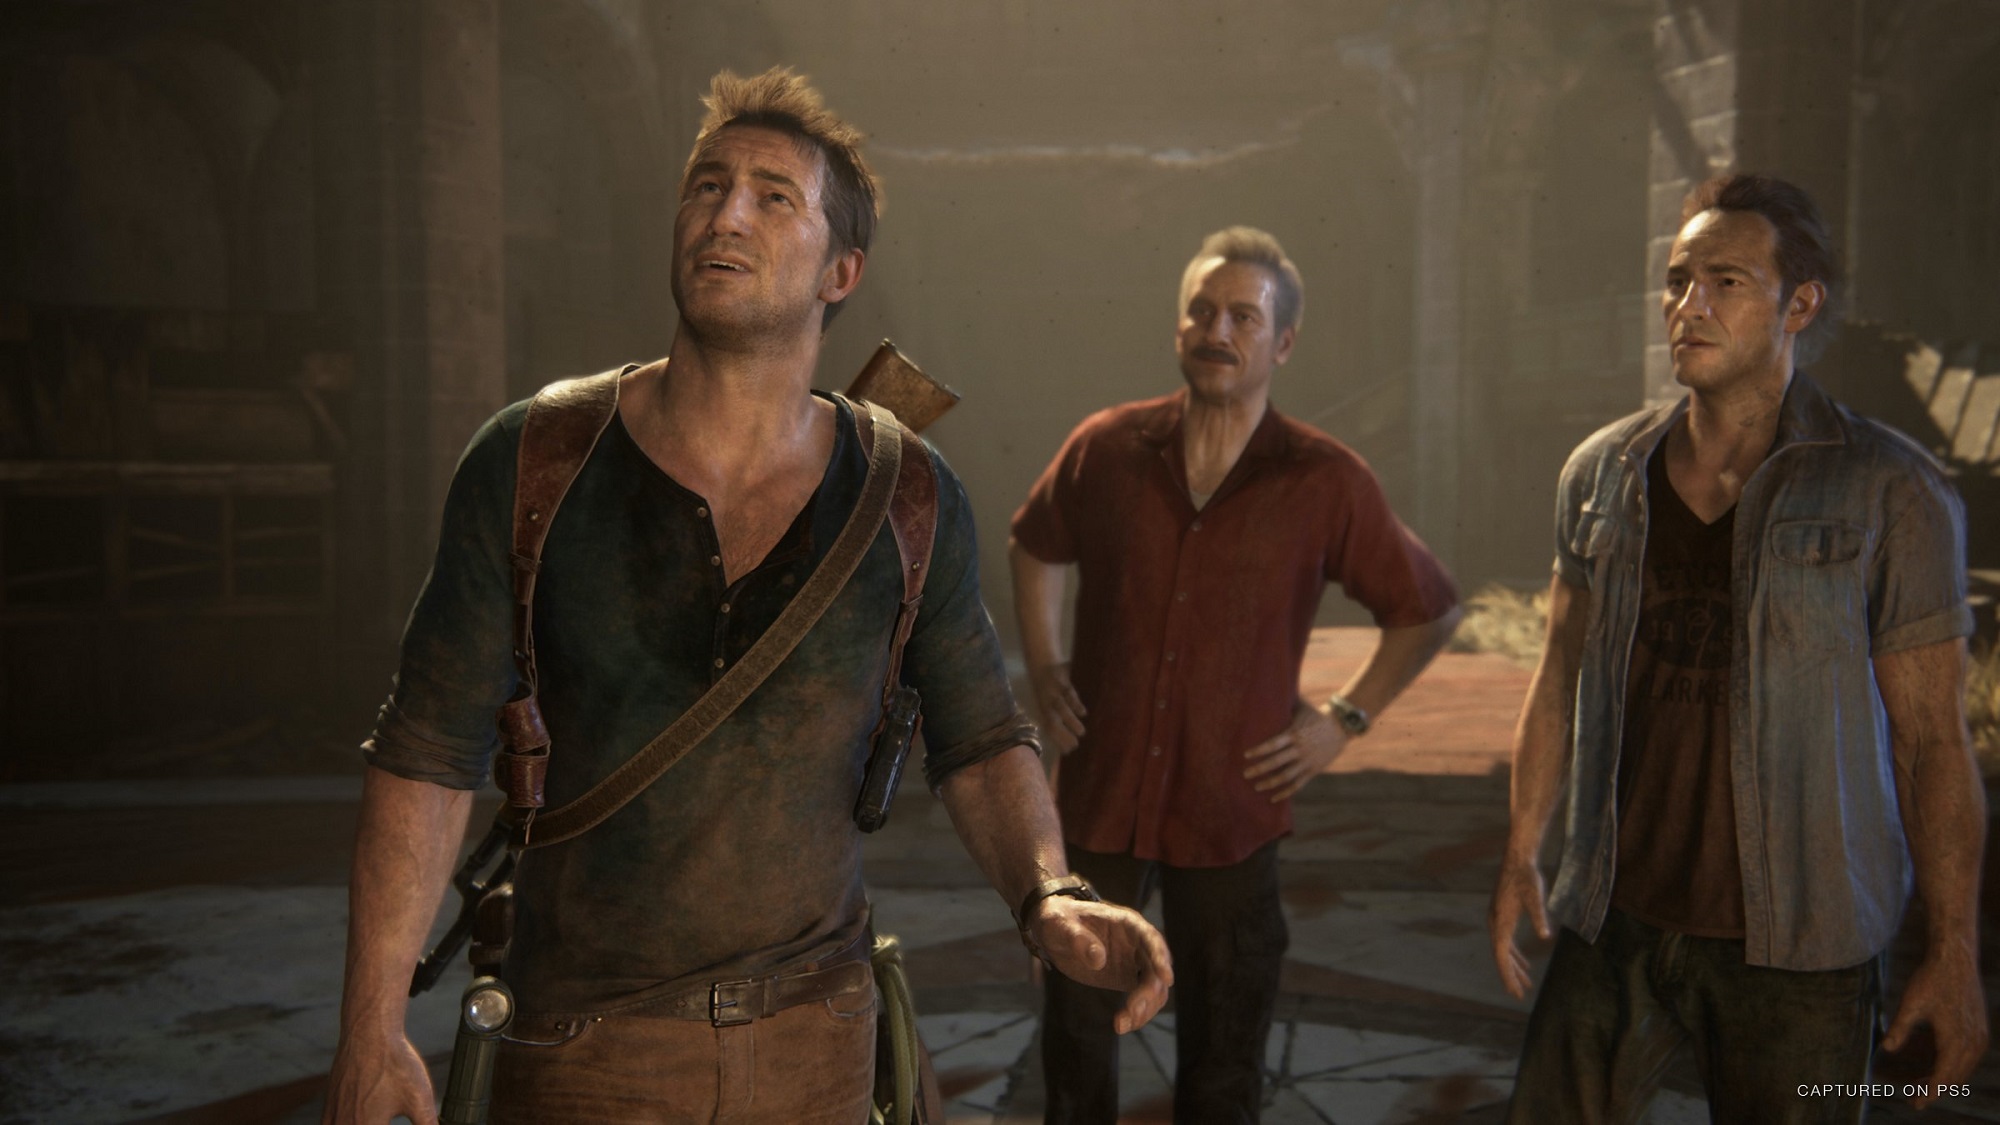 All the best Uncharted games are cheap right now